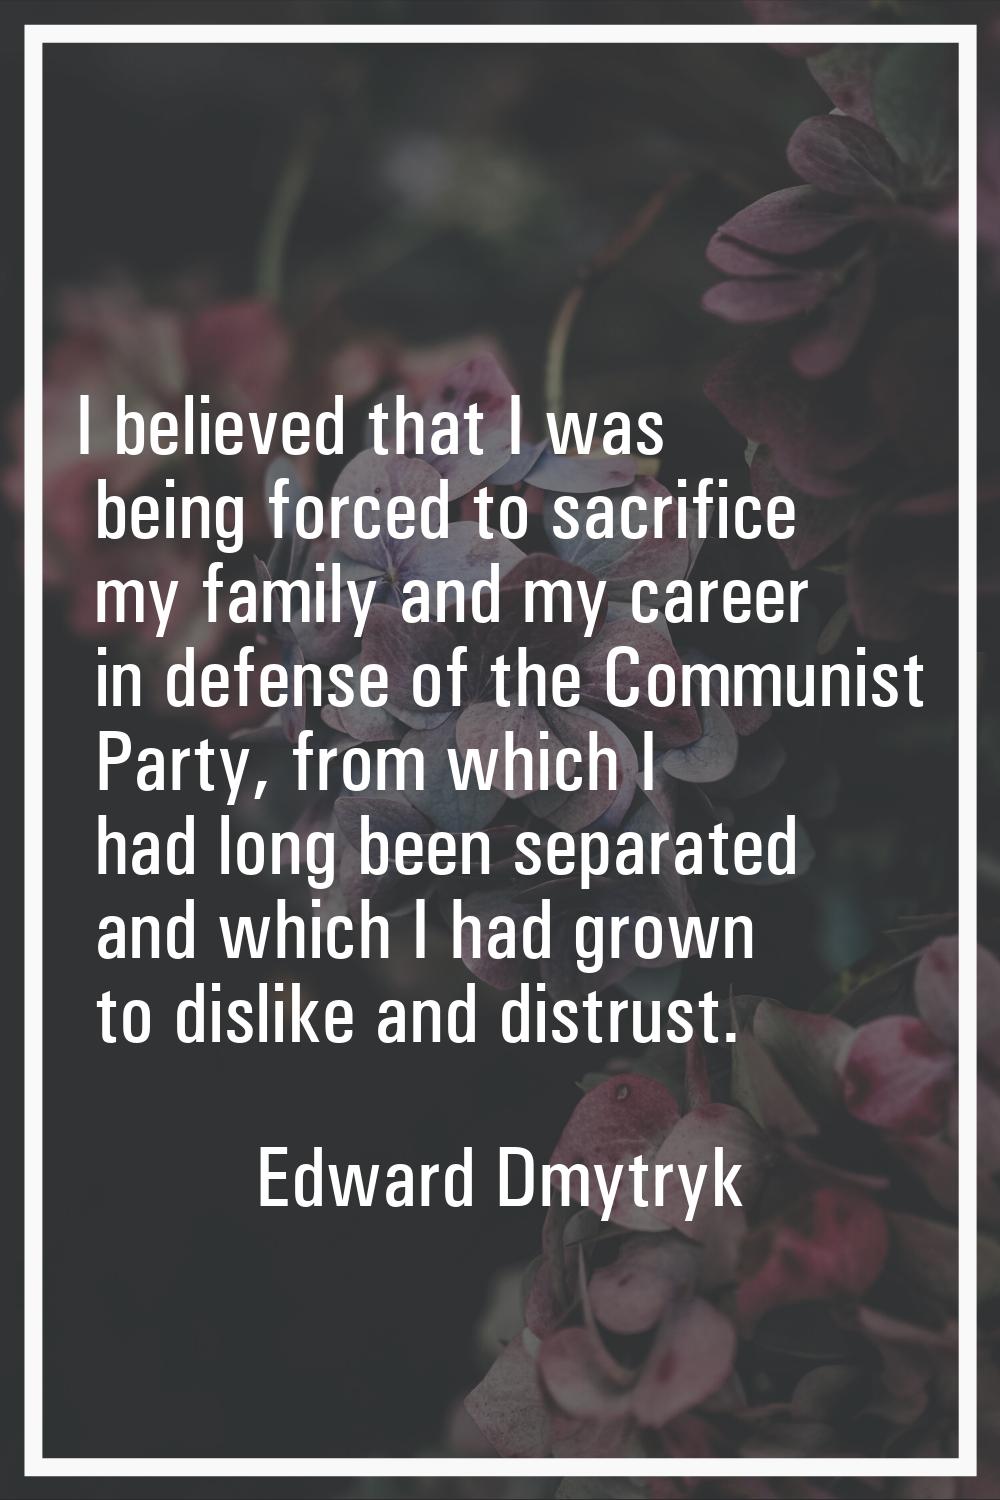 I believed that I was being forced to sacrifice my family and my career in defense of the Communist